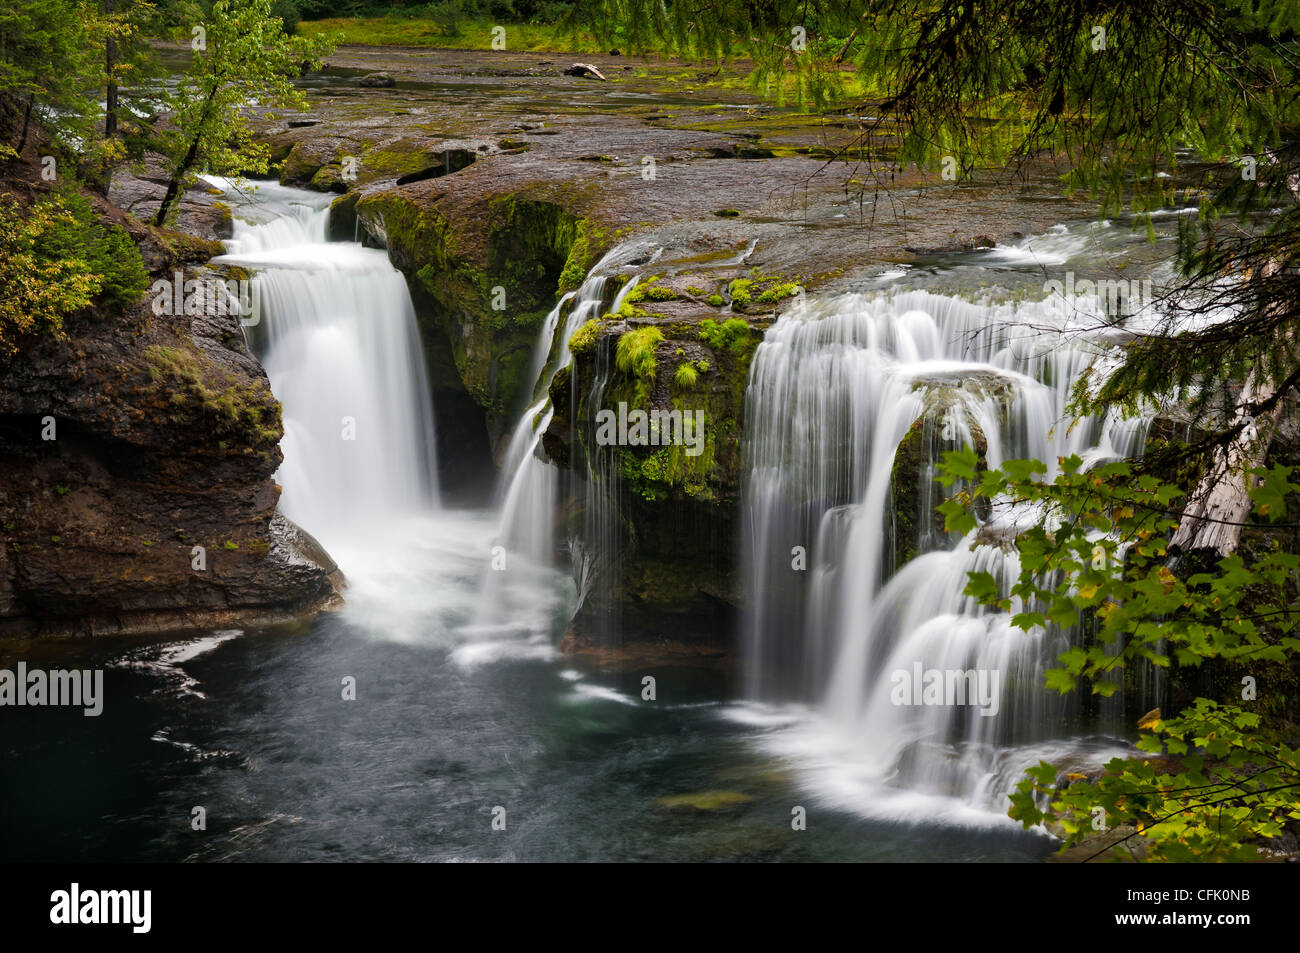 Abbassare Lewis scende, Lewis River, Gifford Pinchot National Forest, Washington. Foto Stock